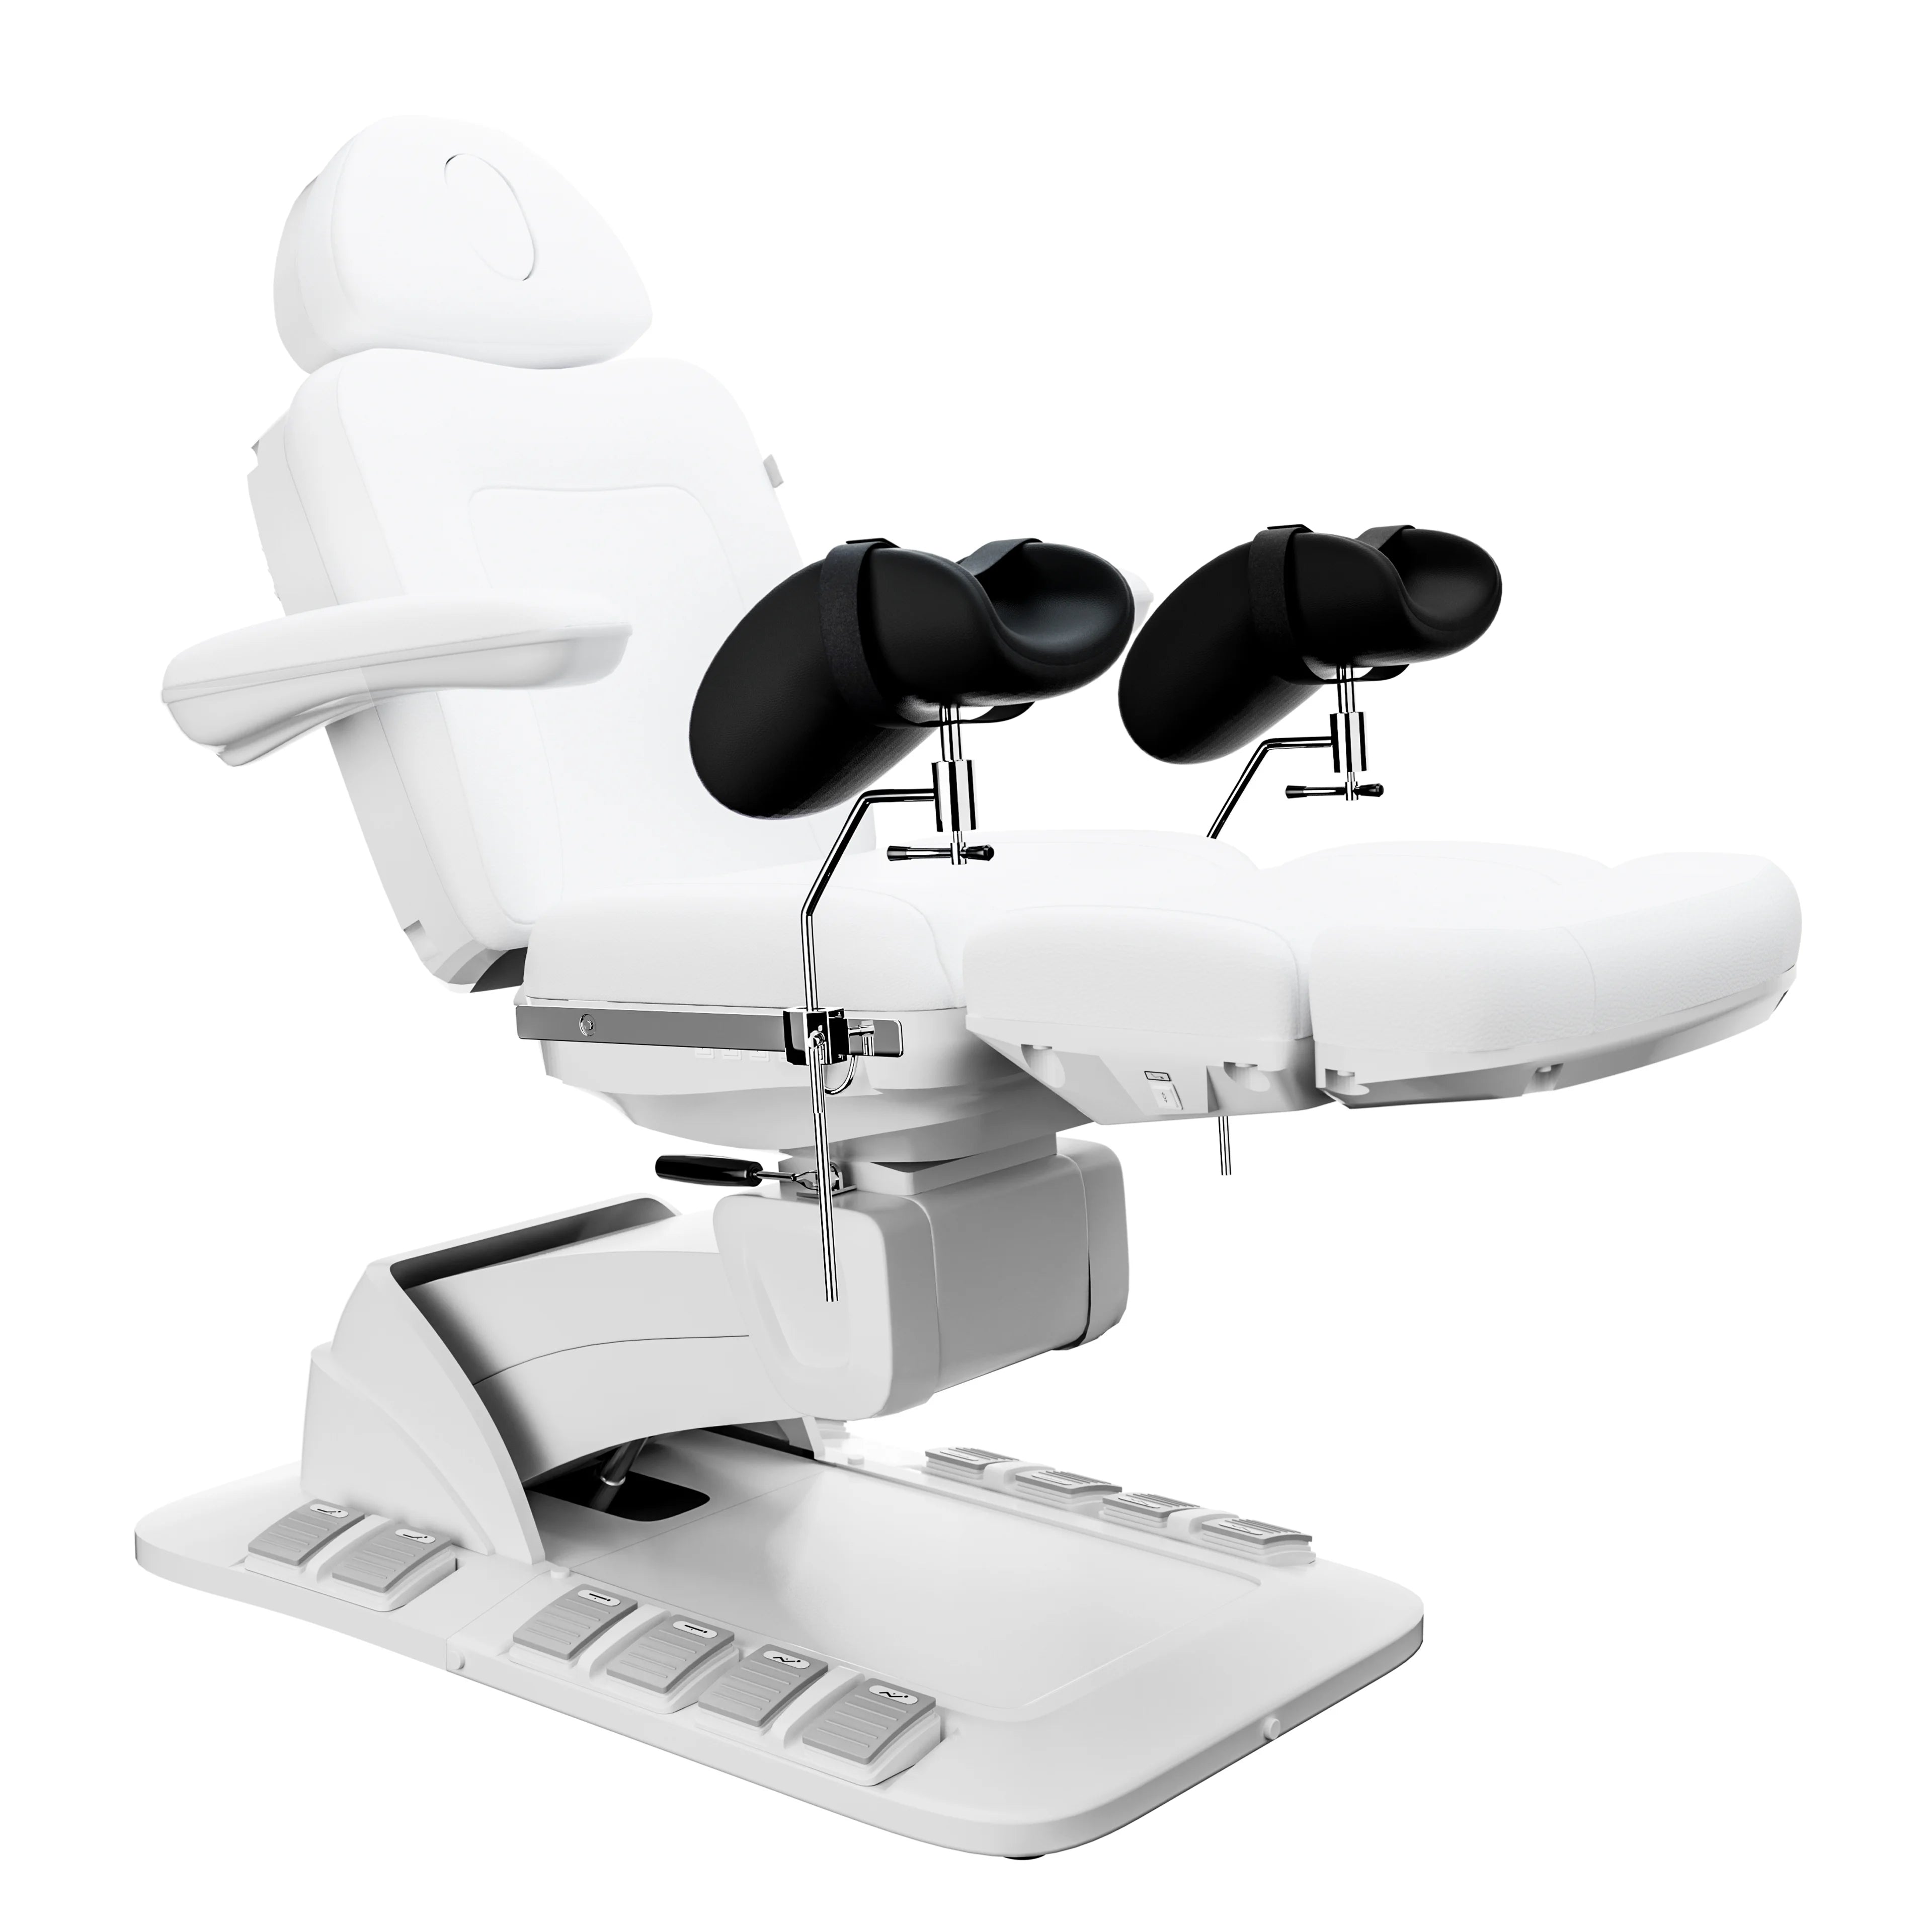 SPAMARC . Novato (White) . OBGYN & GYNECOLOGY . STIRRUPS . ROTATING . 4 MOTOR SPA TREATMENT CHAIR/BED